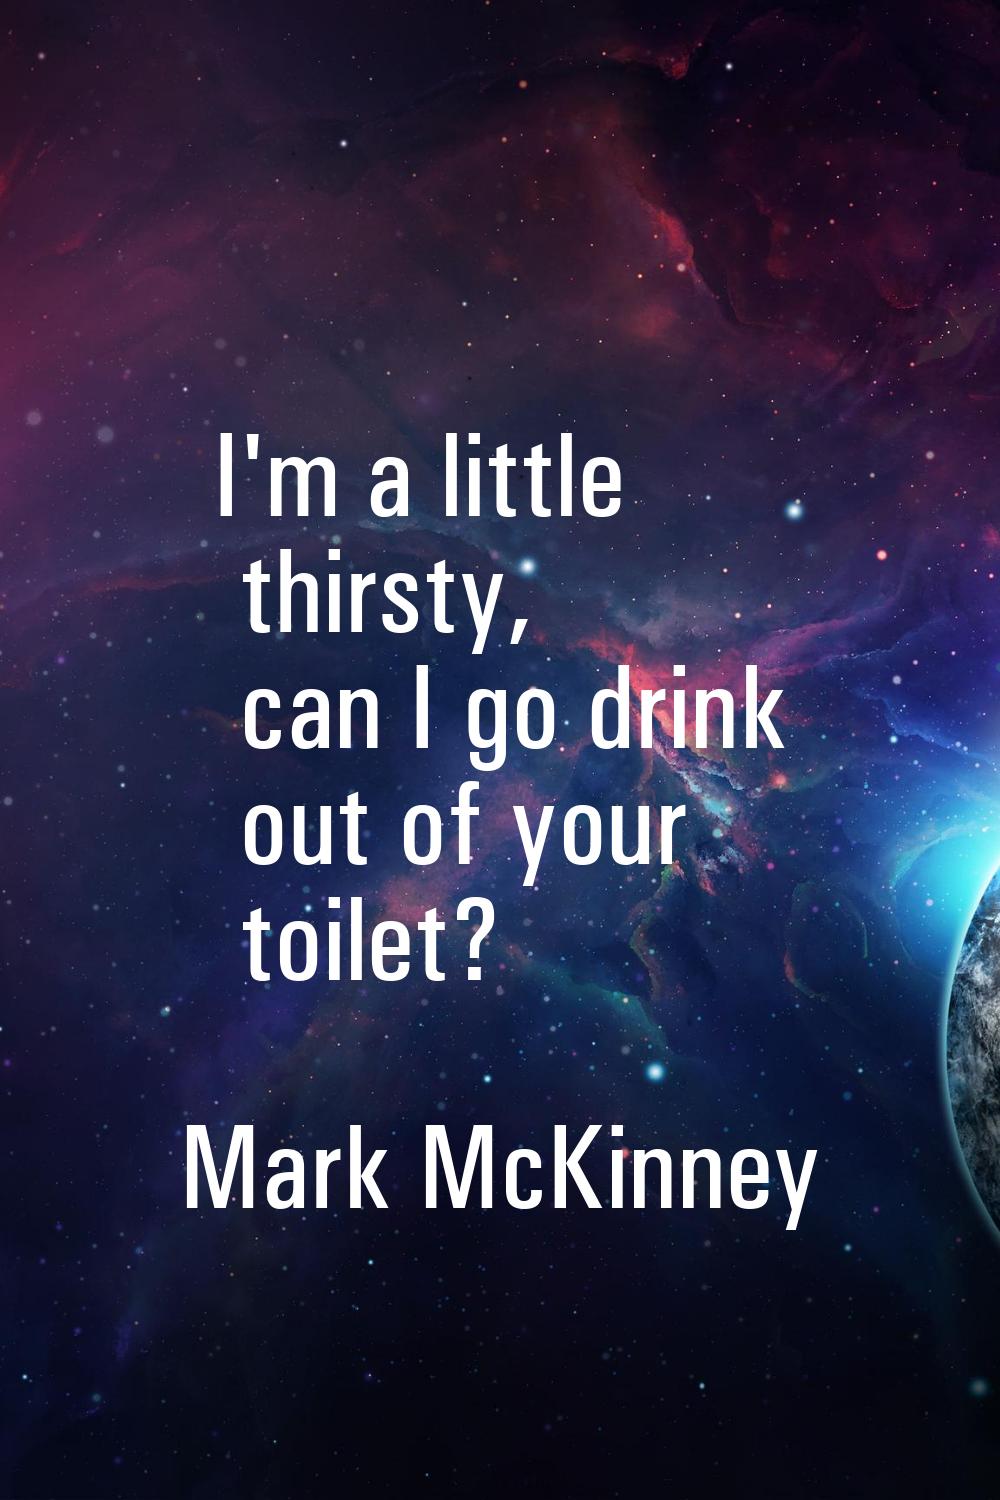 I'm a little thirsty, can I go drink out of your toilet?